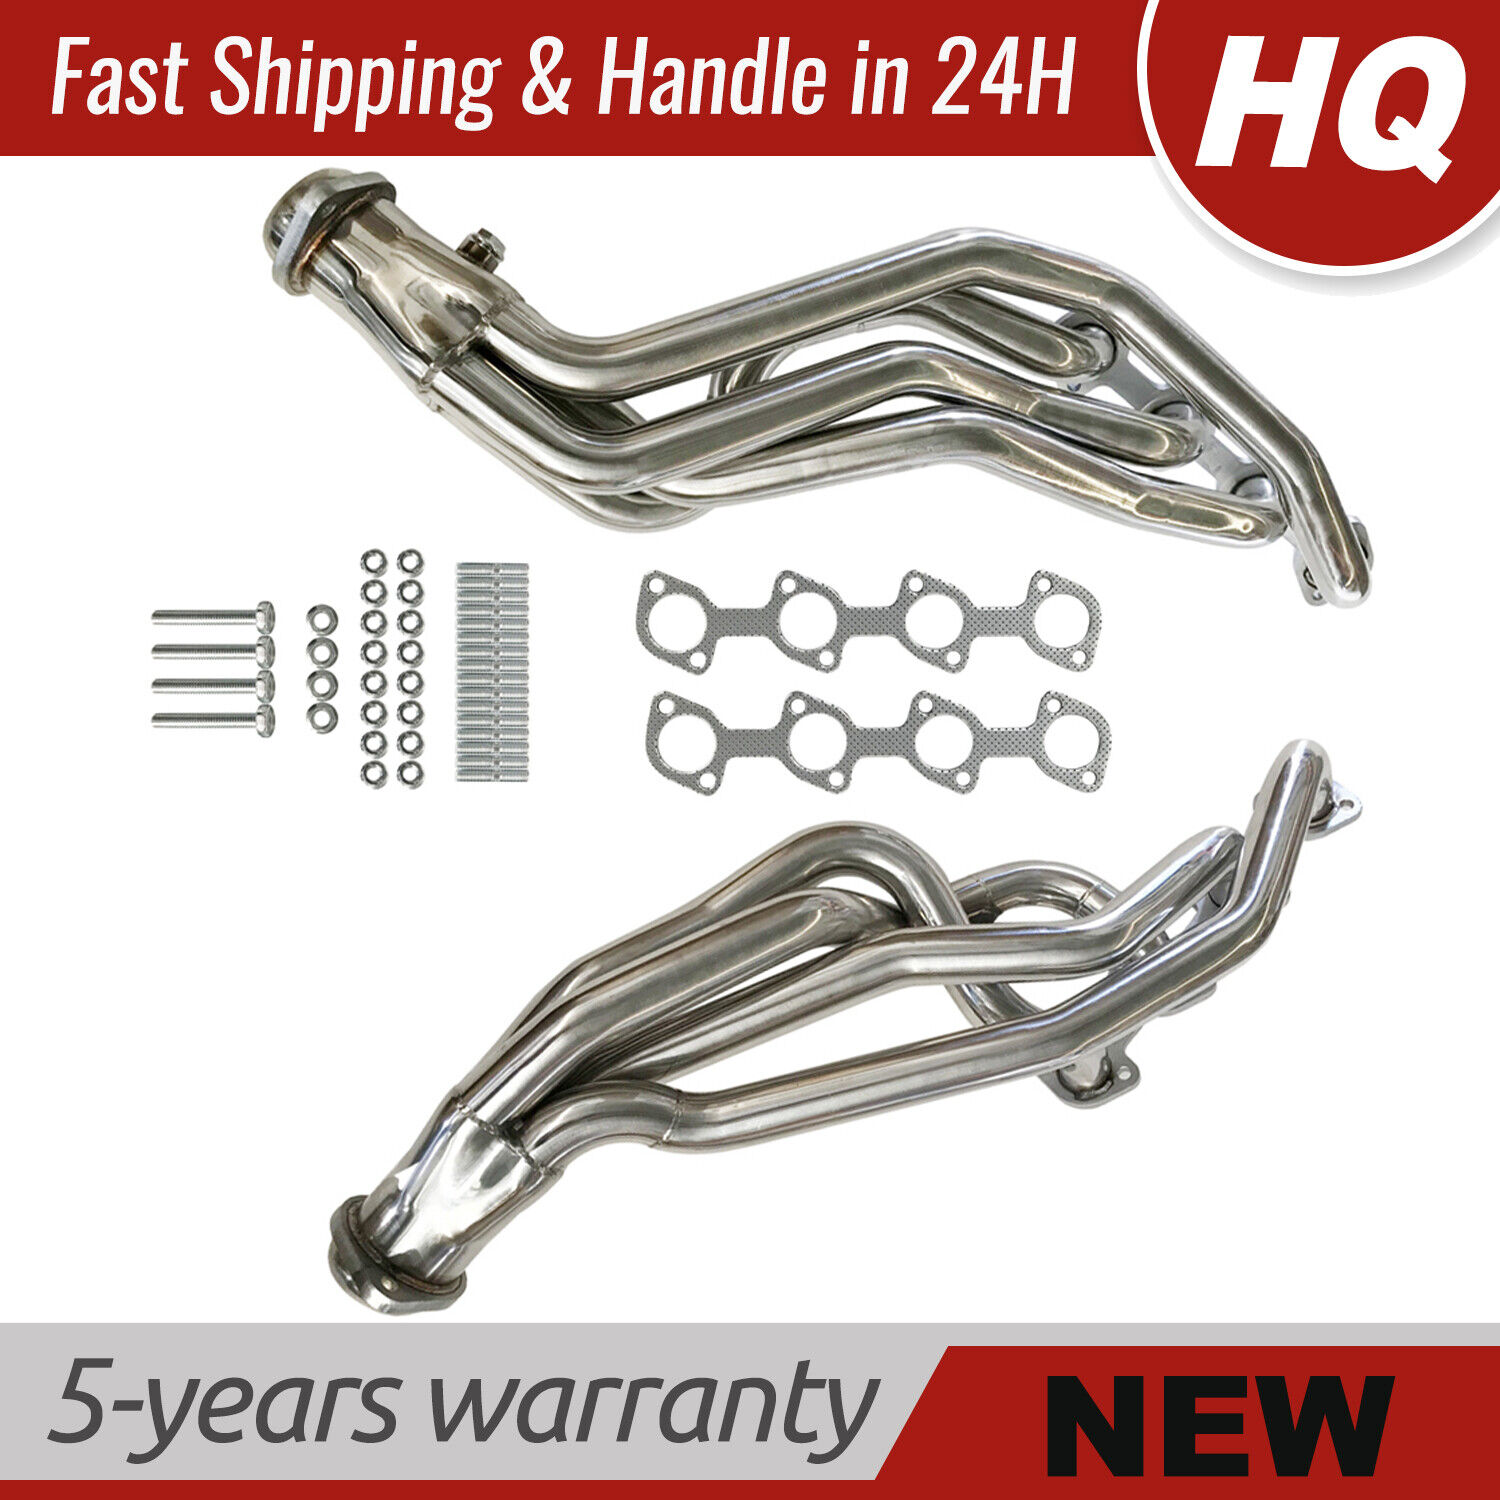 Performance Exhaust Manifold Headers Fits For 1996-2004 Ford Mustang GT 4.6L V8